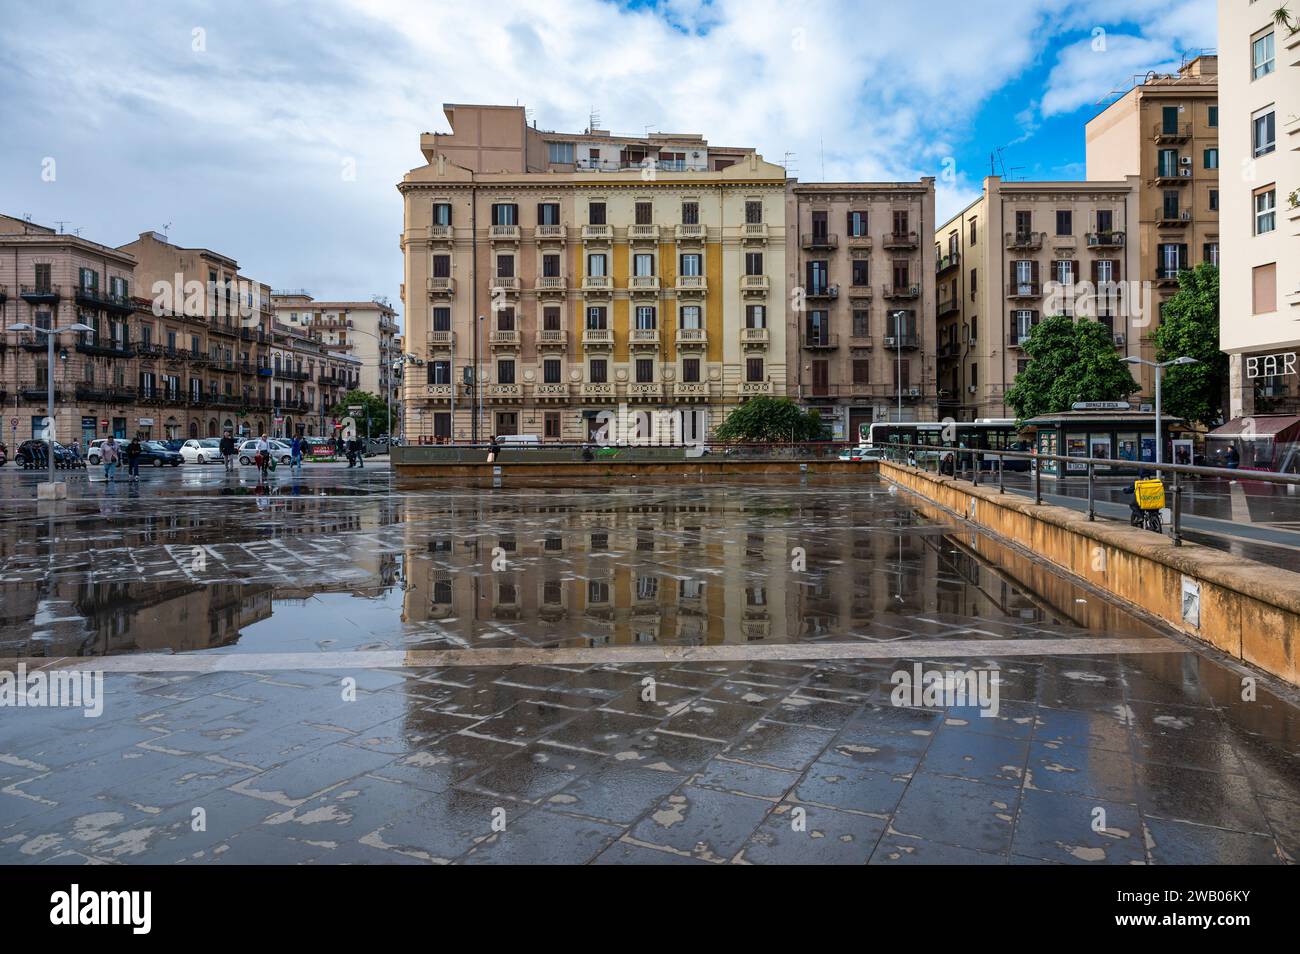 Palermo, Sicily, Italy, 15 December 2023 - The Vittorio Emanuele Orlando Square with restaurants and houses reflecting in the wet tiles Stock Photo